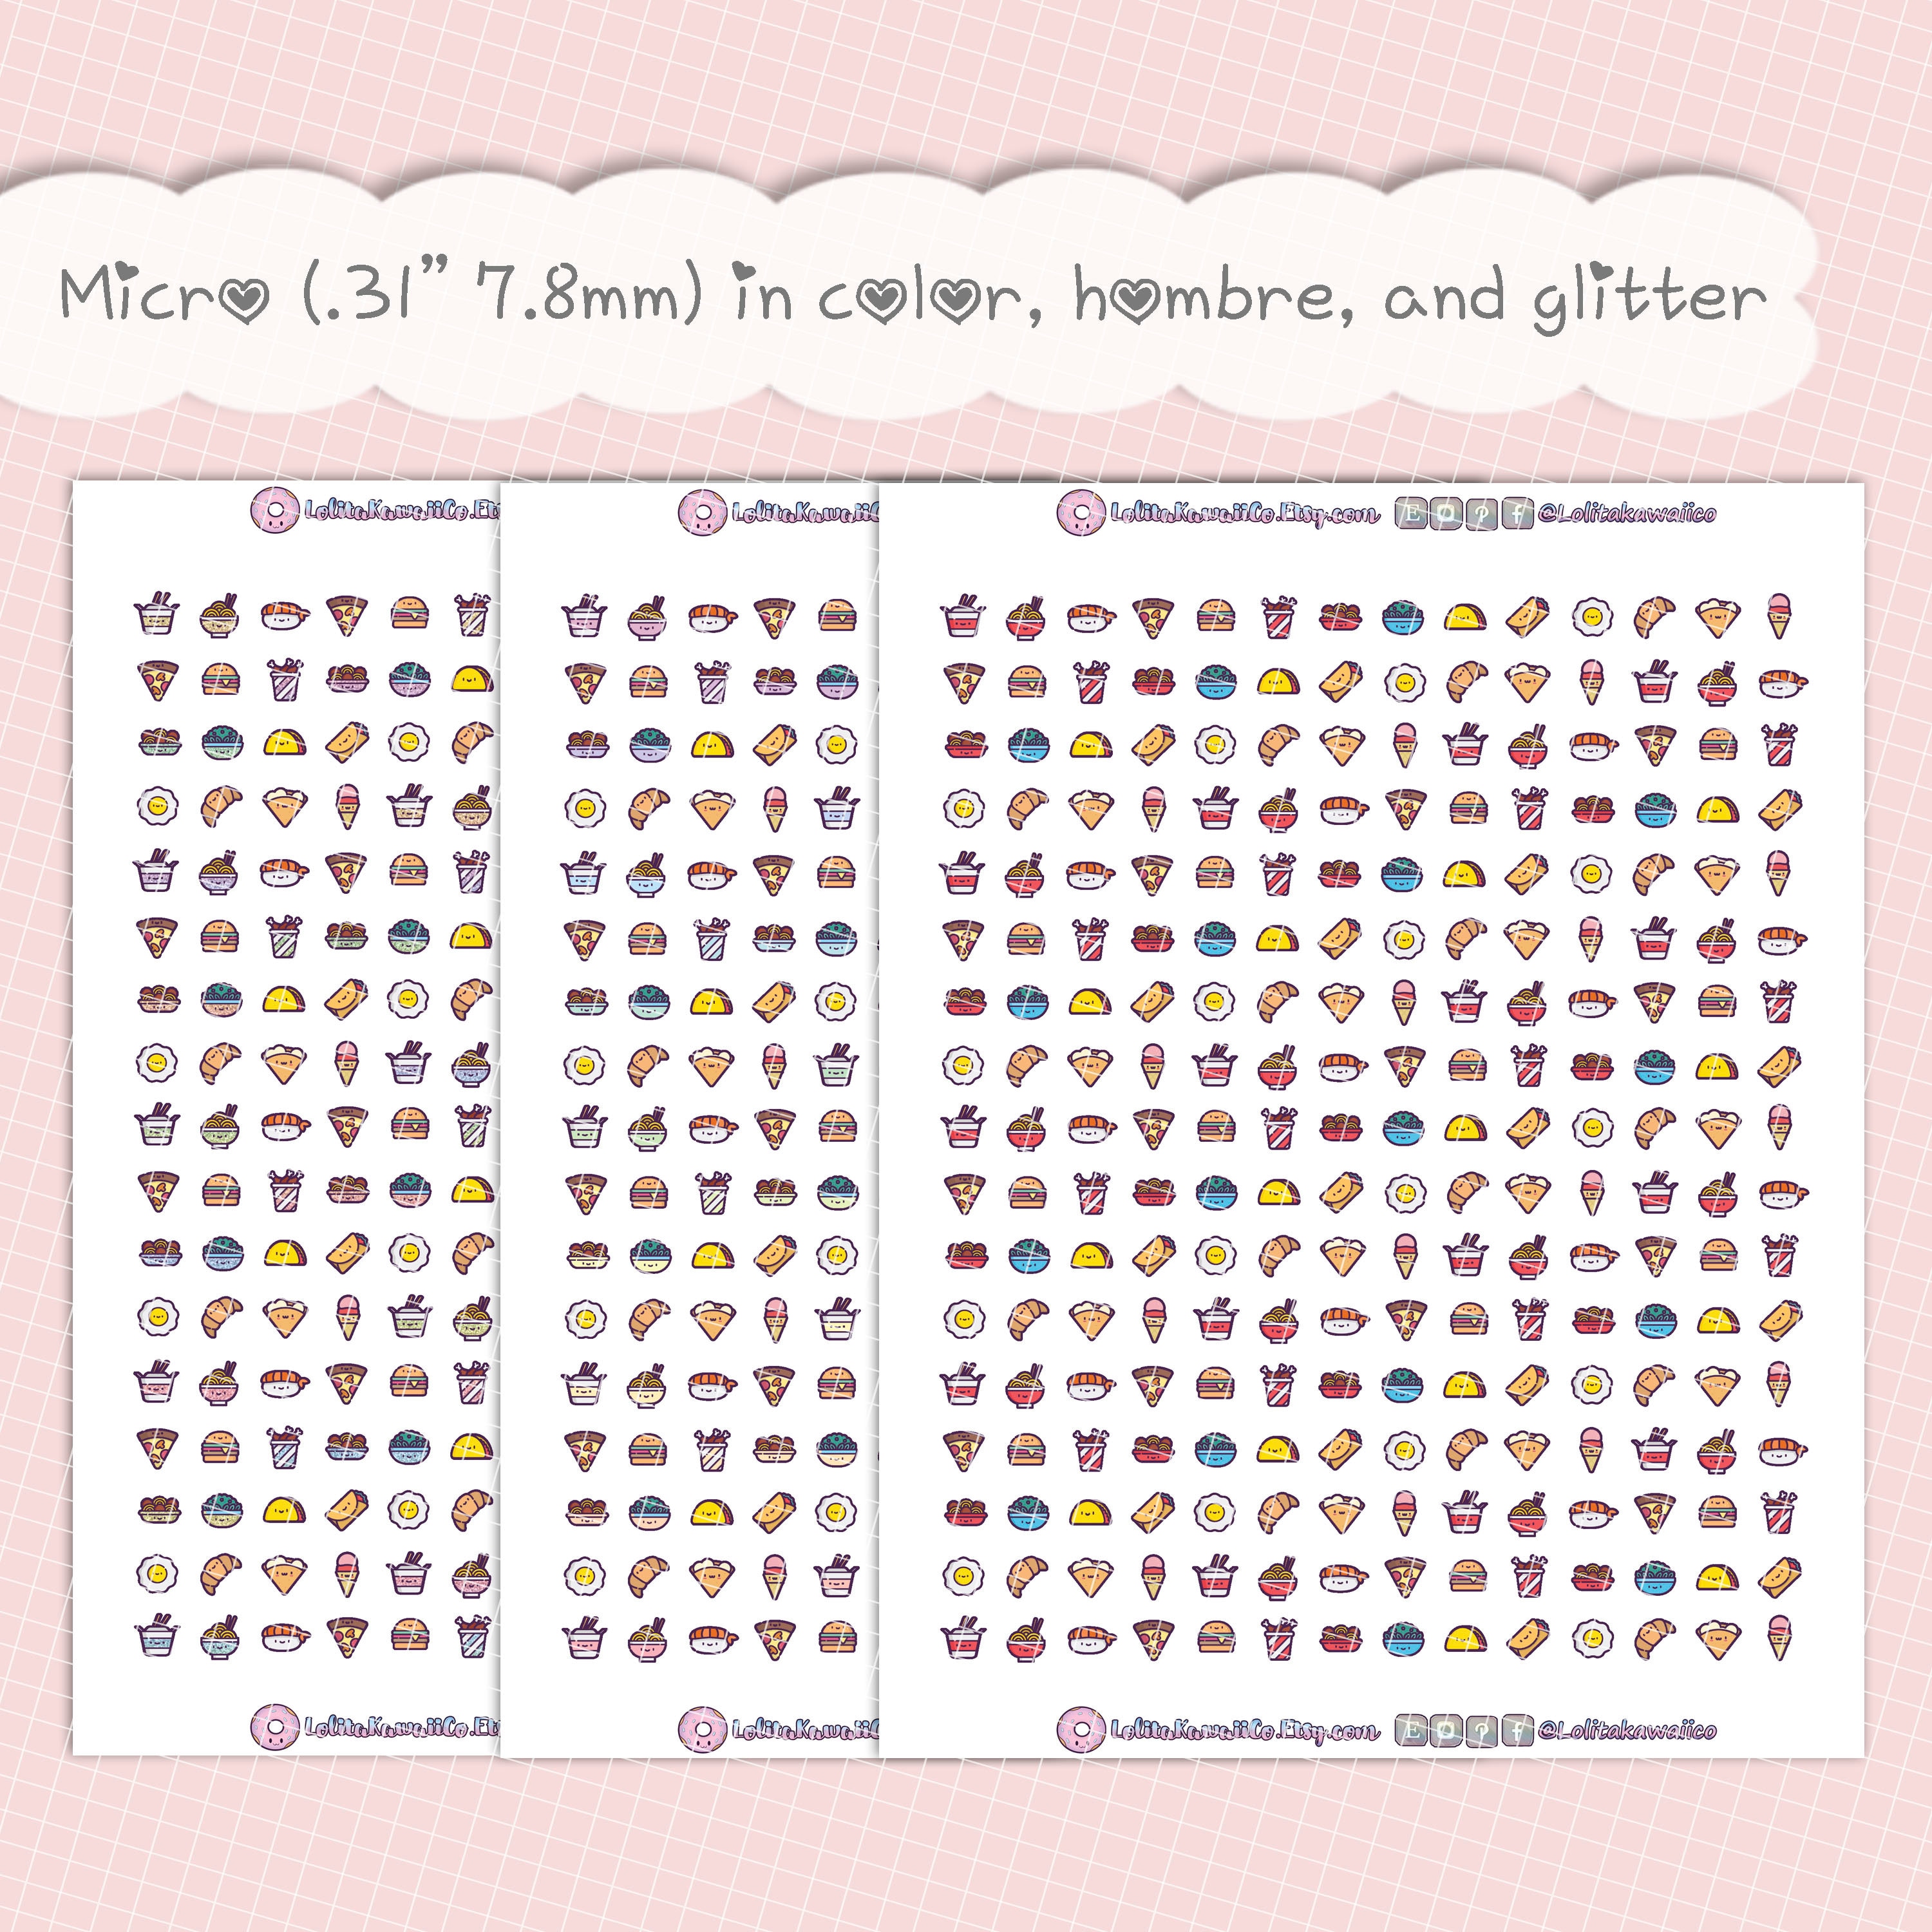 Cute food Sticker pack Printable stickers for kids (2497339)